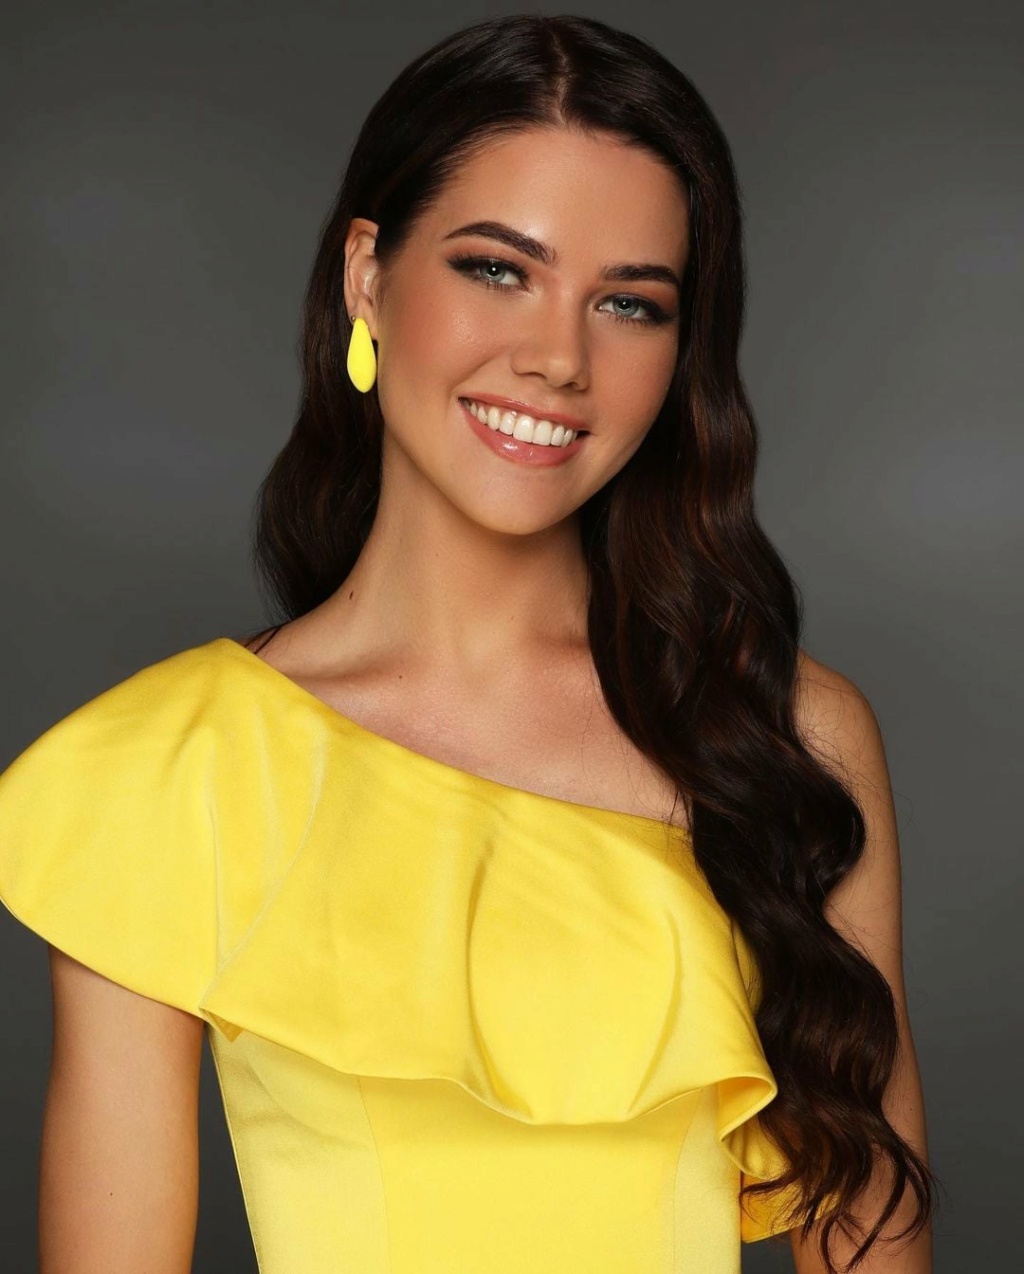 MISS WORLD 2021: OFFICIAL PORTRAITS 26832310